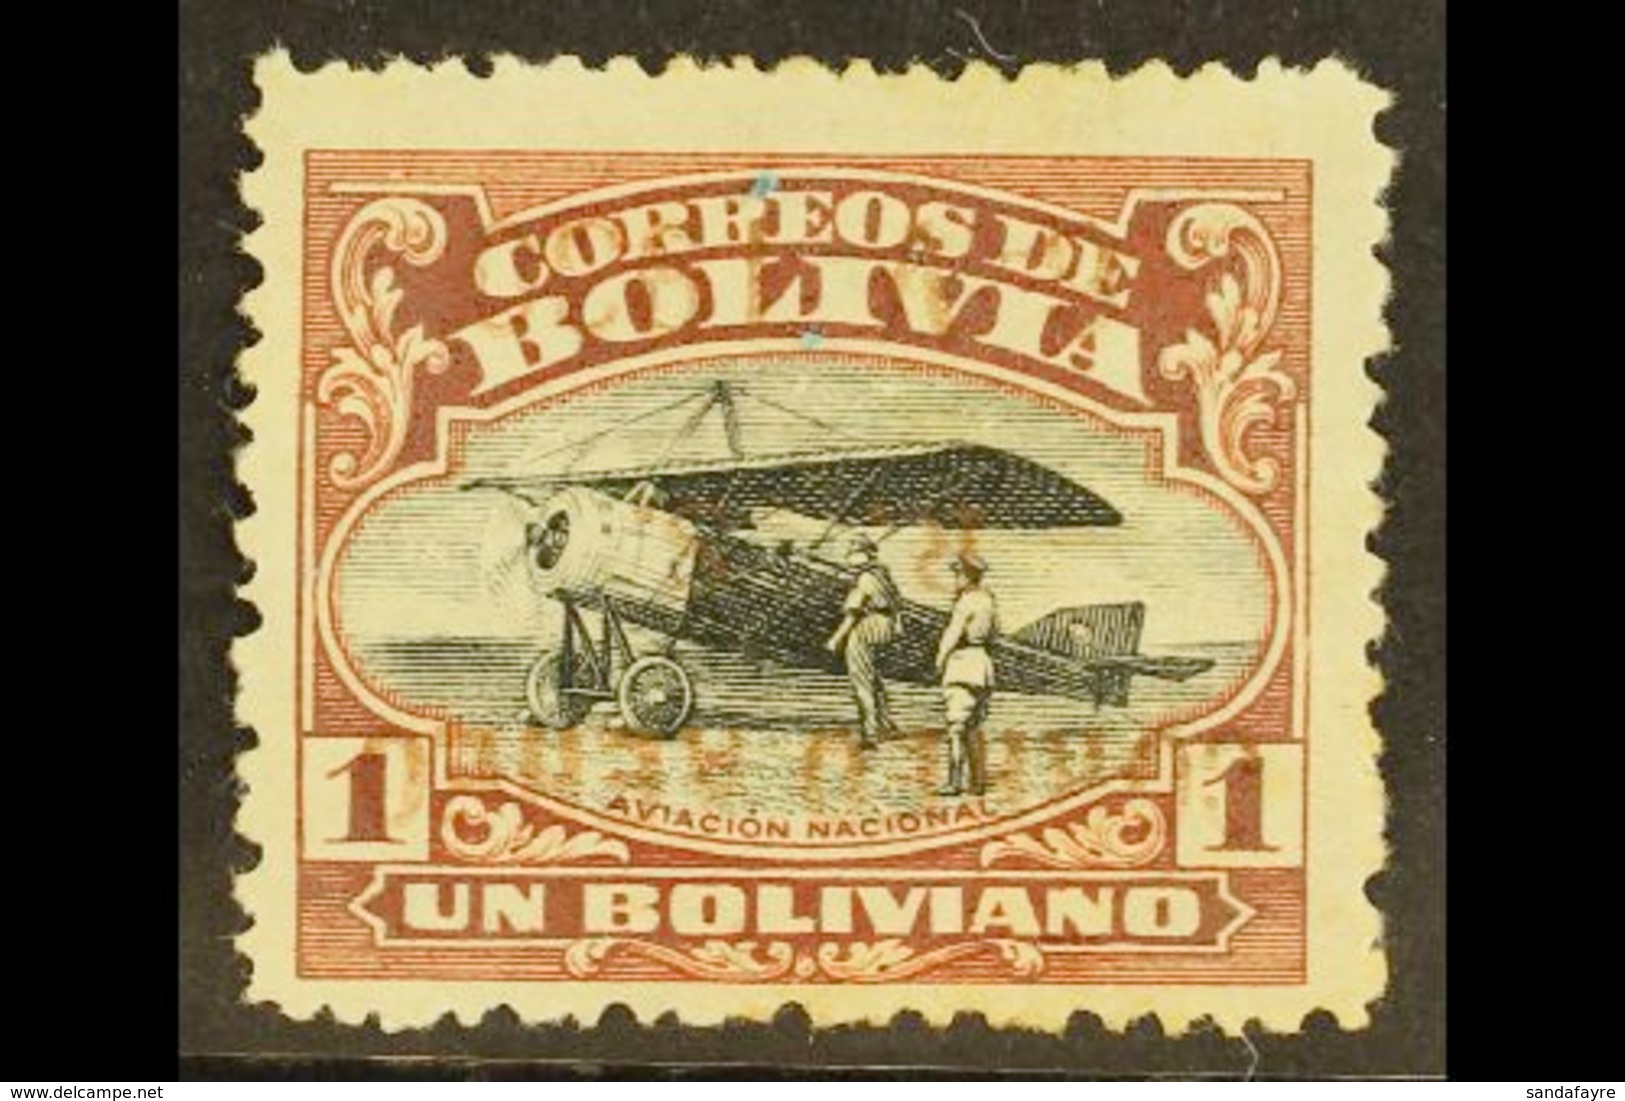 1930 1b Red-brown & Black Air Zeppelin "Correo Aereo" INVERTED OVERPRINT Variety, Scott C18a, Fine Mint, Rather Weak Ove - Bolivië